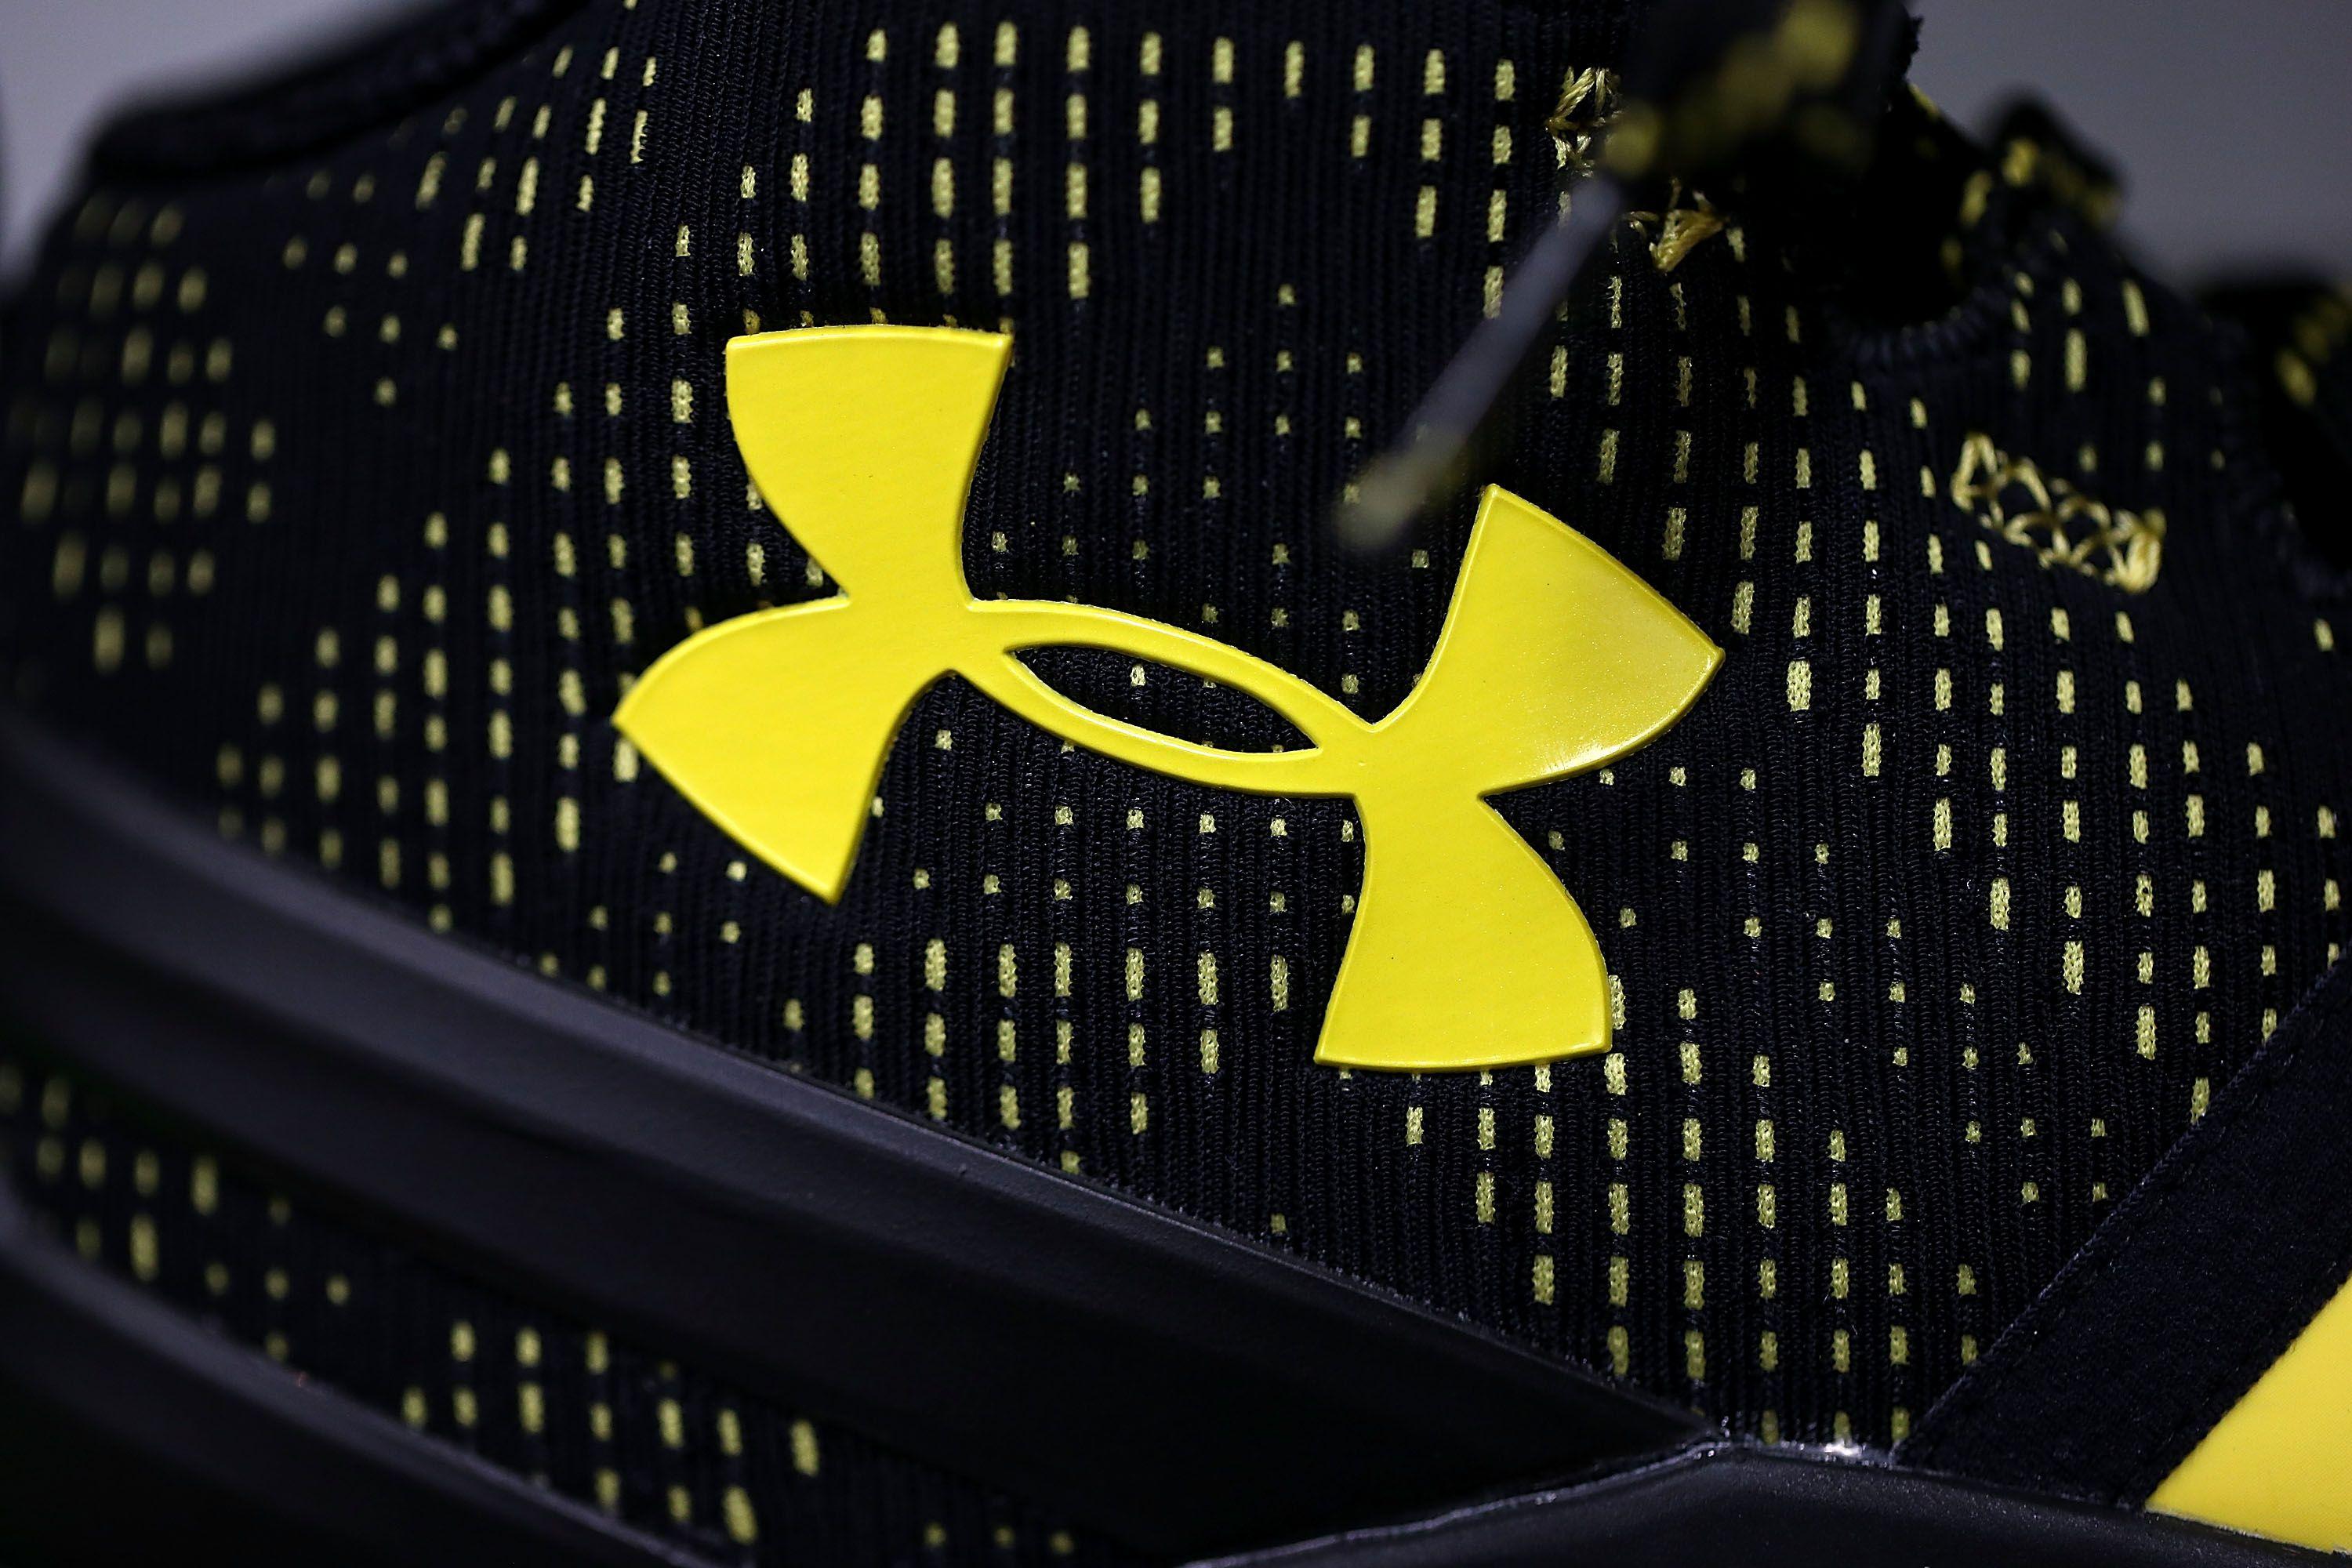 Basketball Shoe Logo - Under Armour Signs Deal With UC Berkeley, Replacing Nike | Fortune